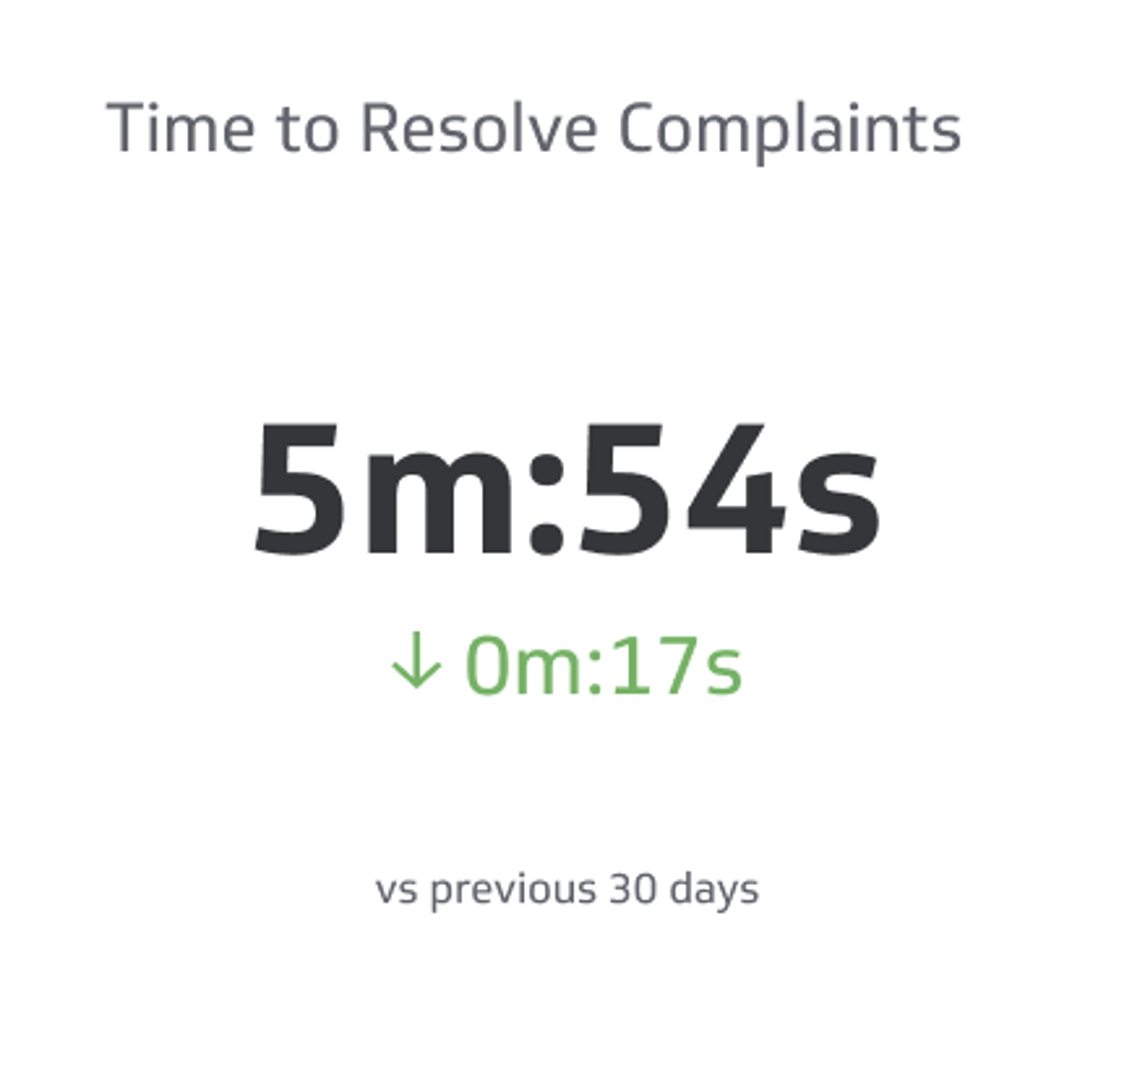 Support KPI Example - Time to Resolve Complaints Metric